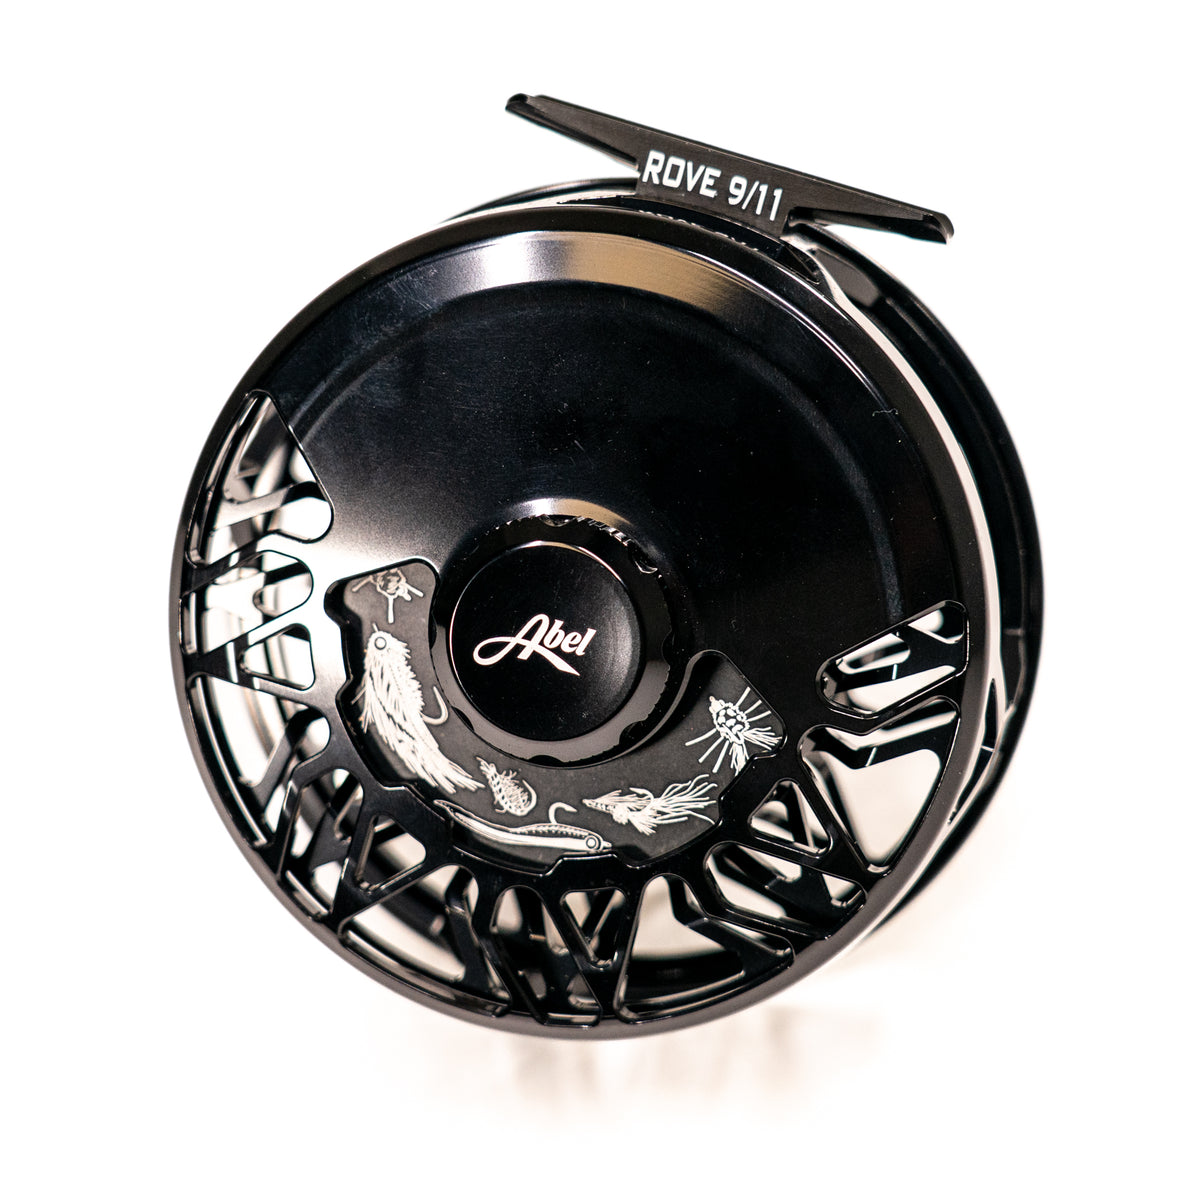 Fly Reels - The Compleat Angler